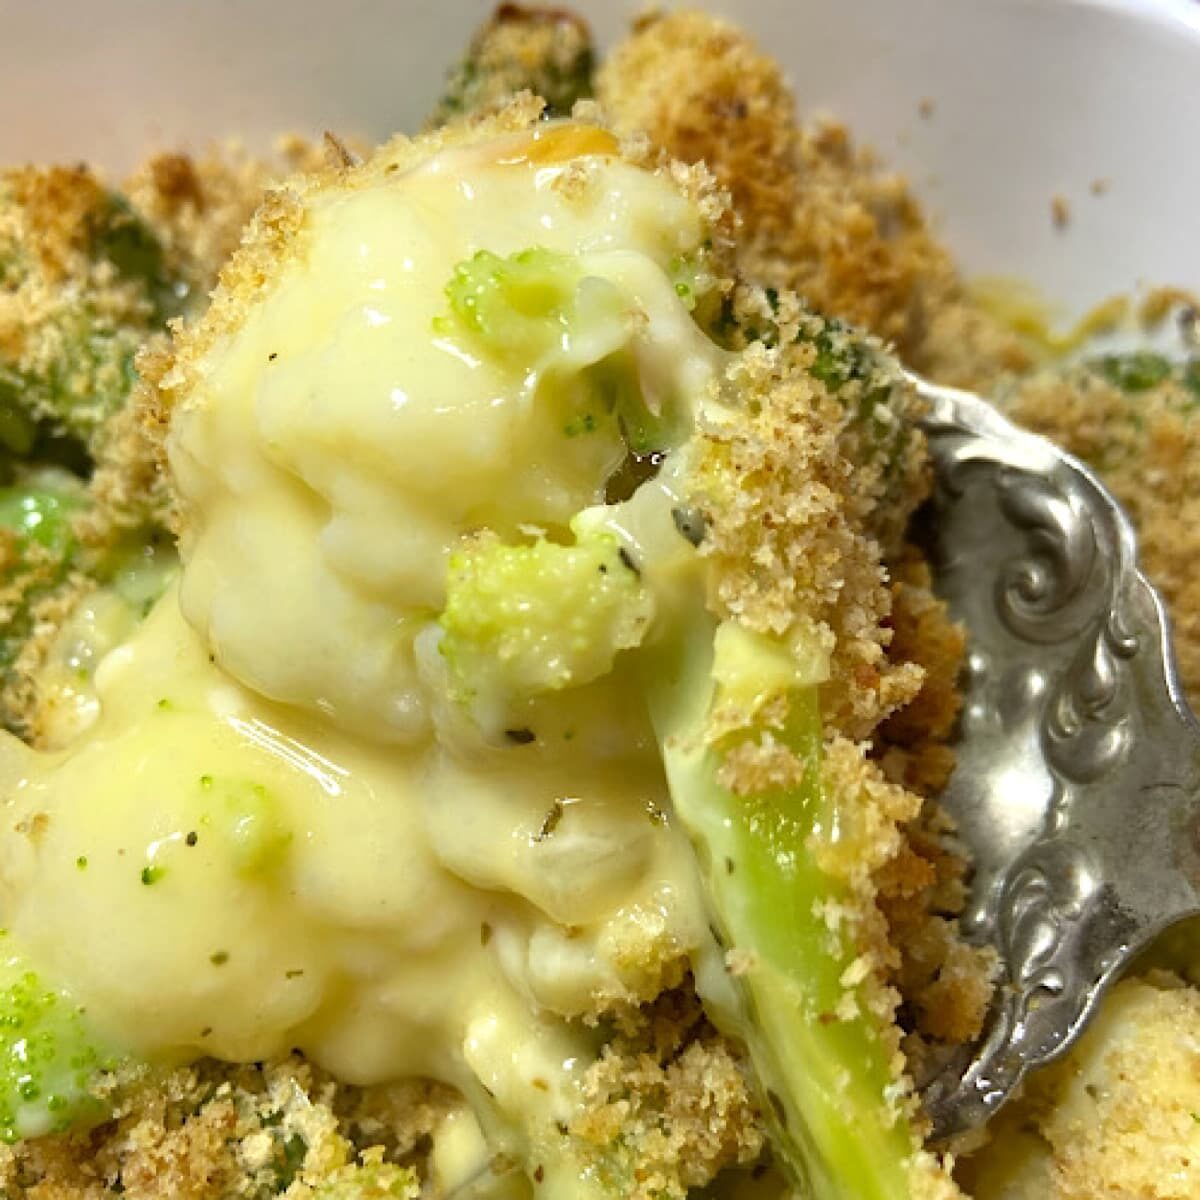 broccoli in cheese sauce with bread crumbs.